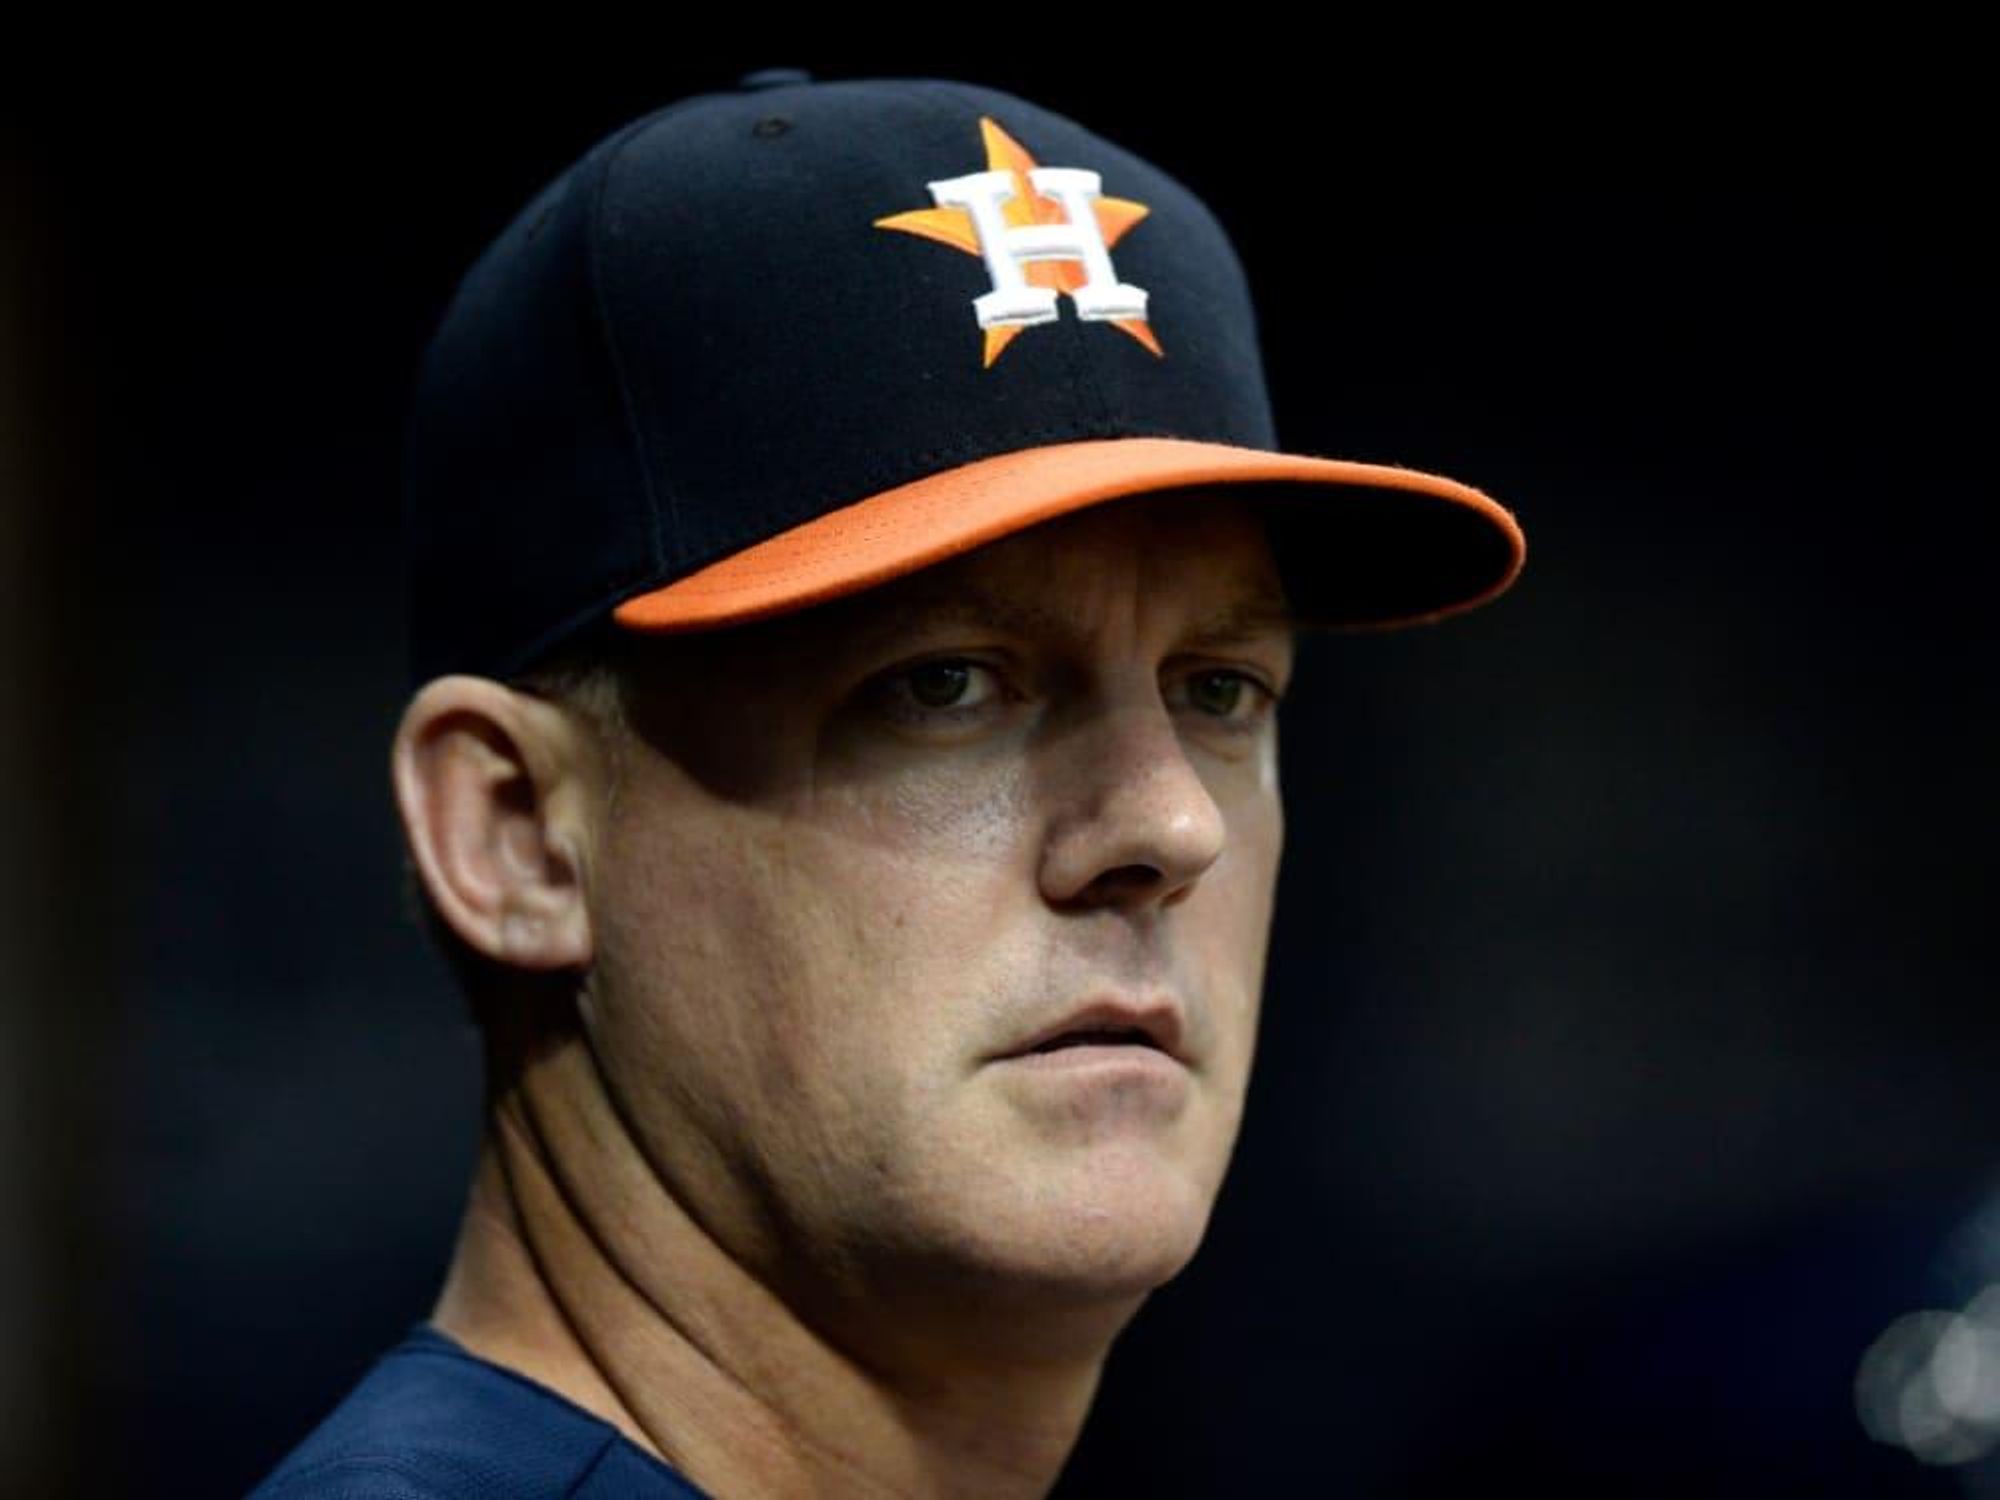 Houston Astros manager A.J. Hinch